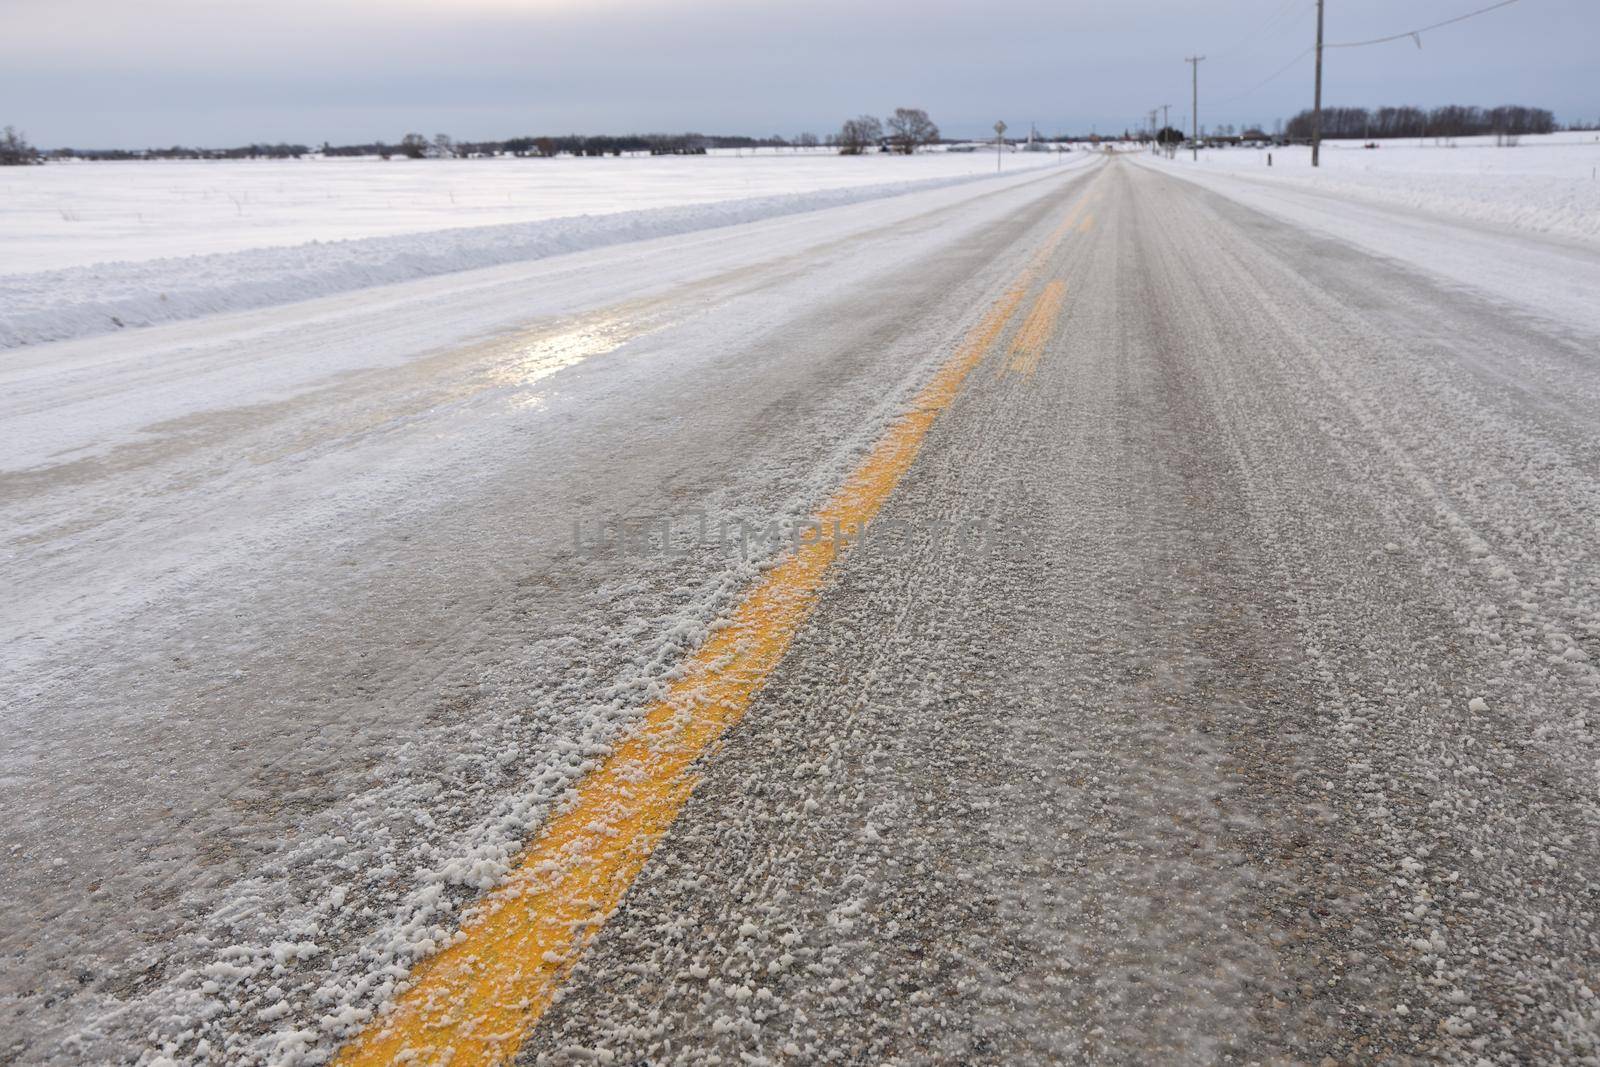 Close up of Slippery Icy Slushy Pavement Road in Winter in Rural Setting. High quality photo